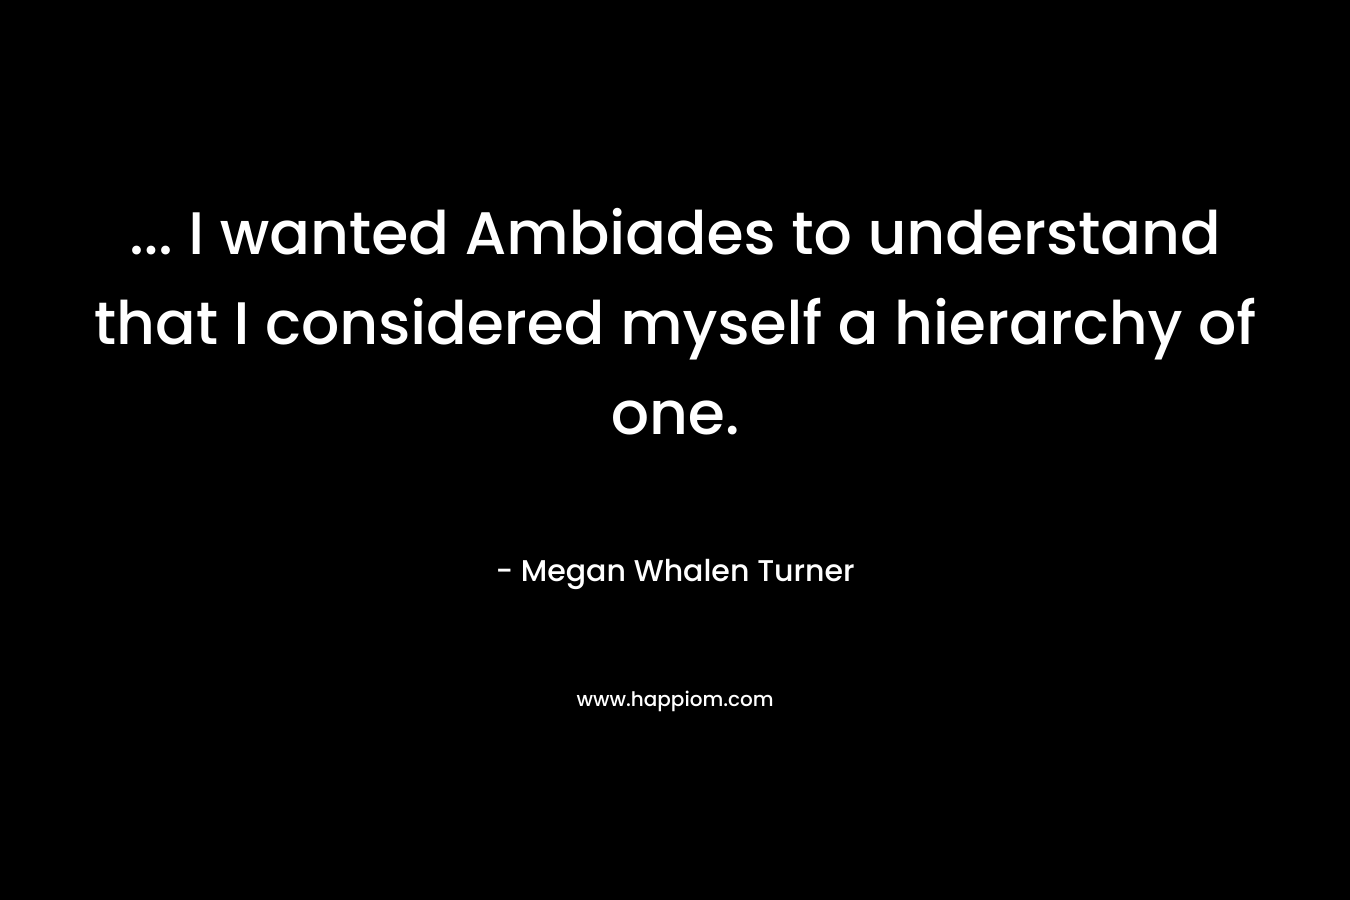 ... I wanted Ambiades to understand that I considered myself a hierarchy of one.